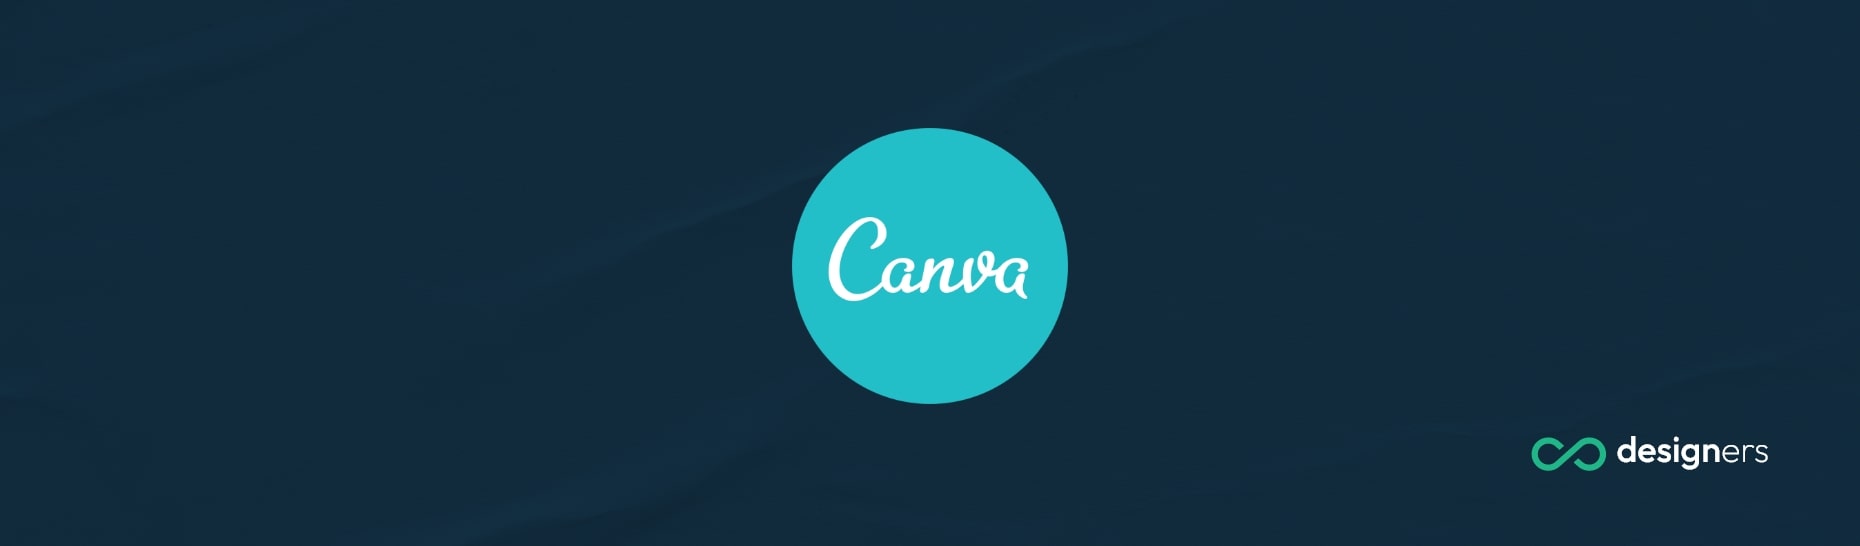 Can I Use Canva for Anything?